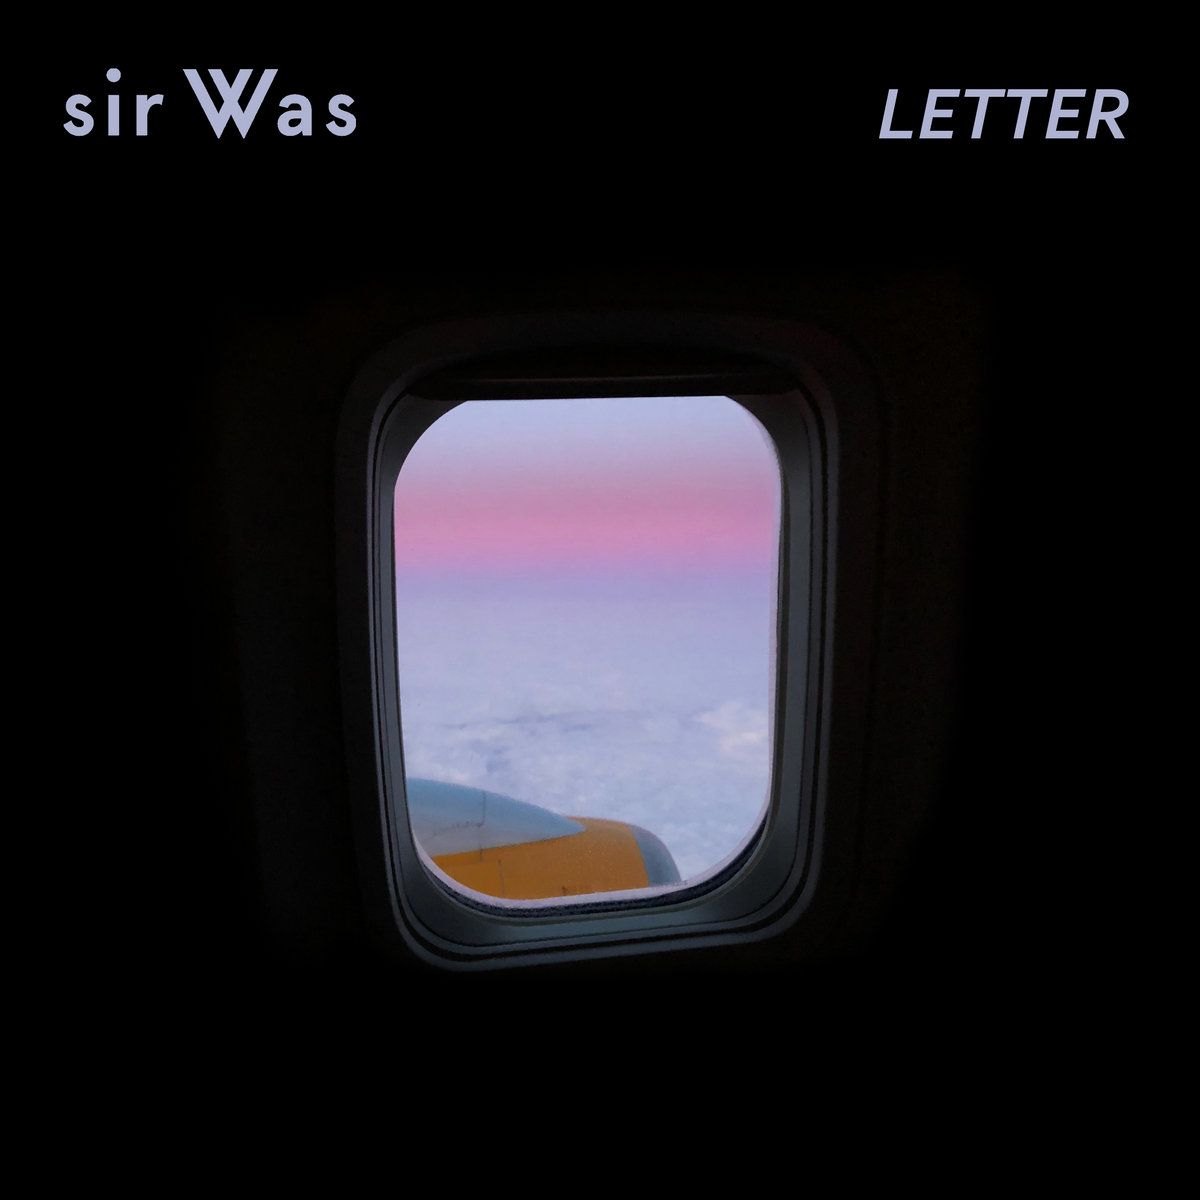 “Letter” serves as a dreamy segway into whatever sir Was’ future beholds